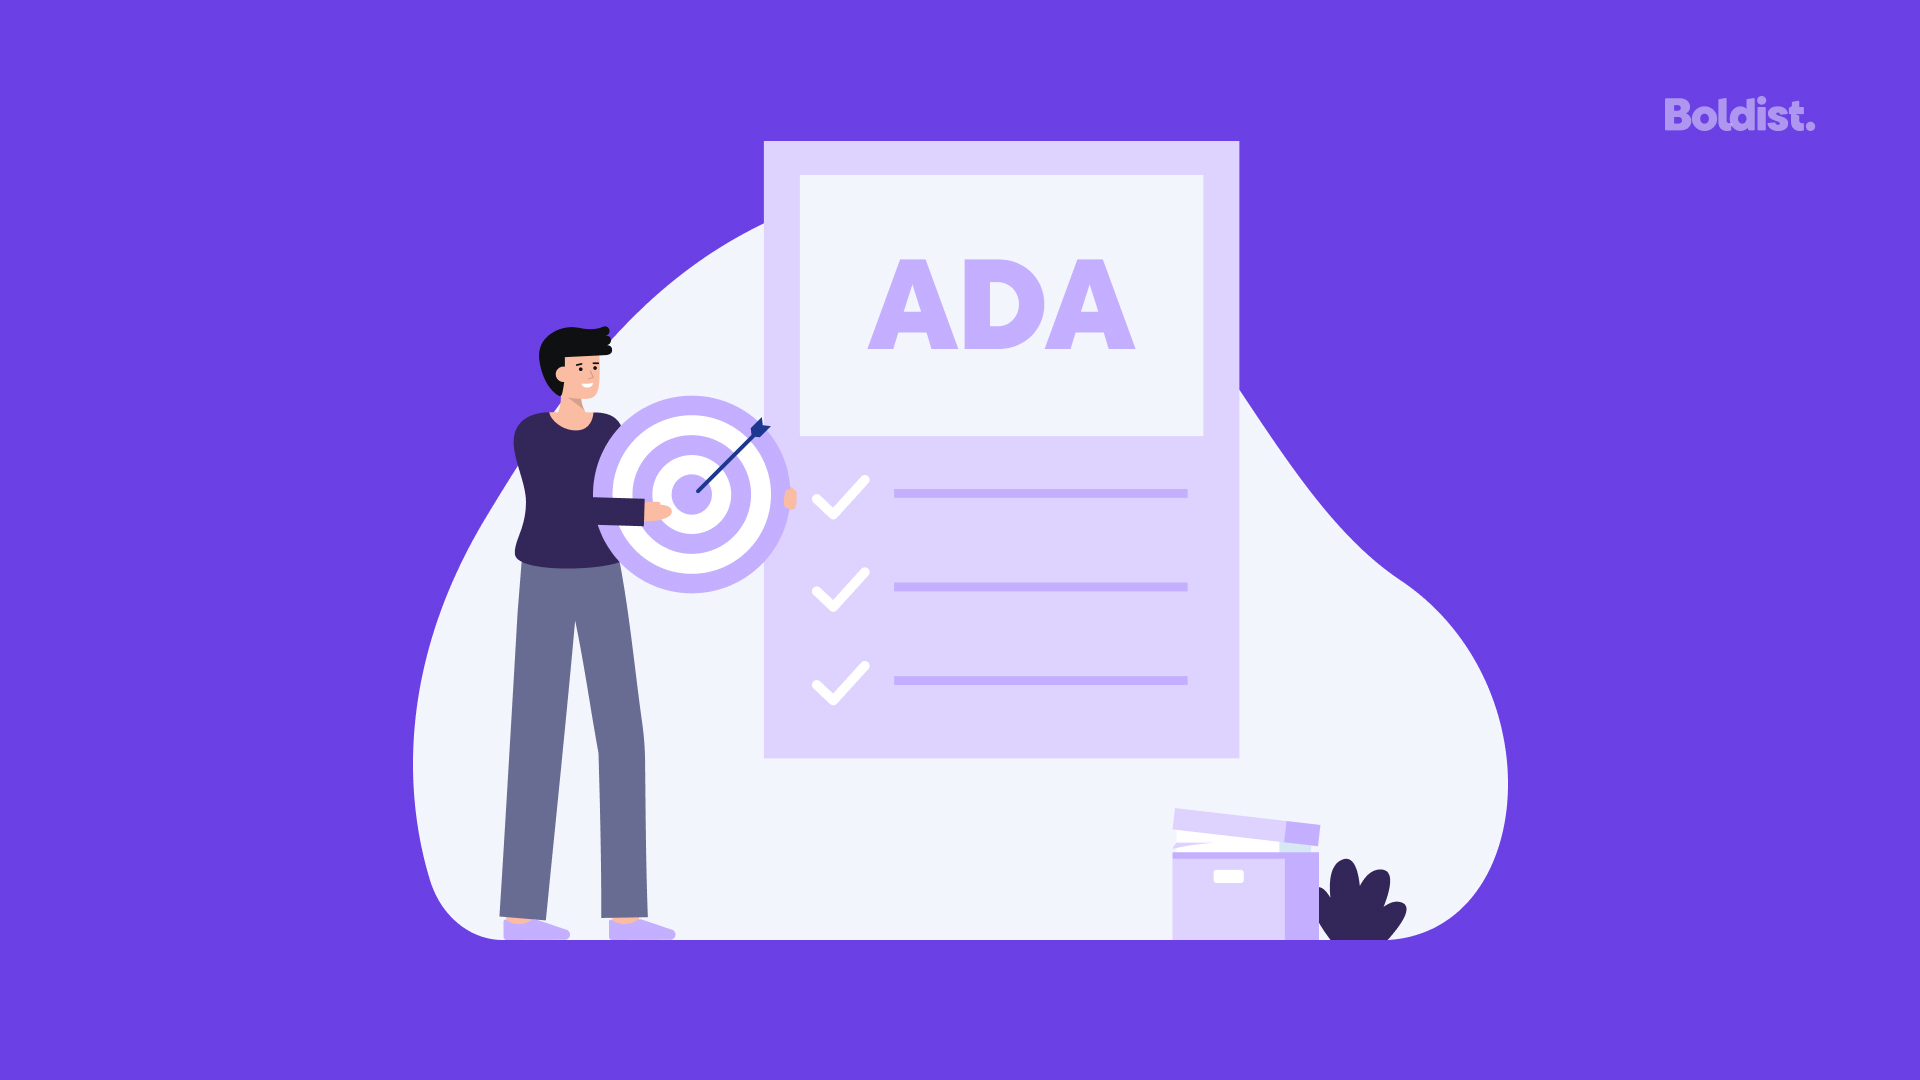 Boldist - 5 Tips to make your website accessible and ADA-Compliant